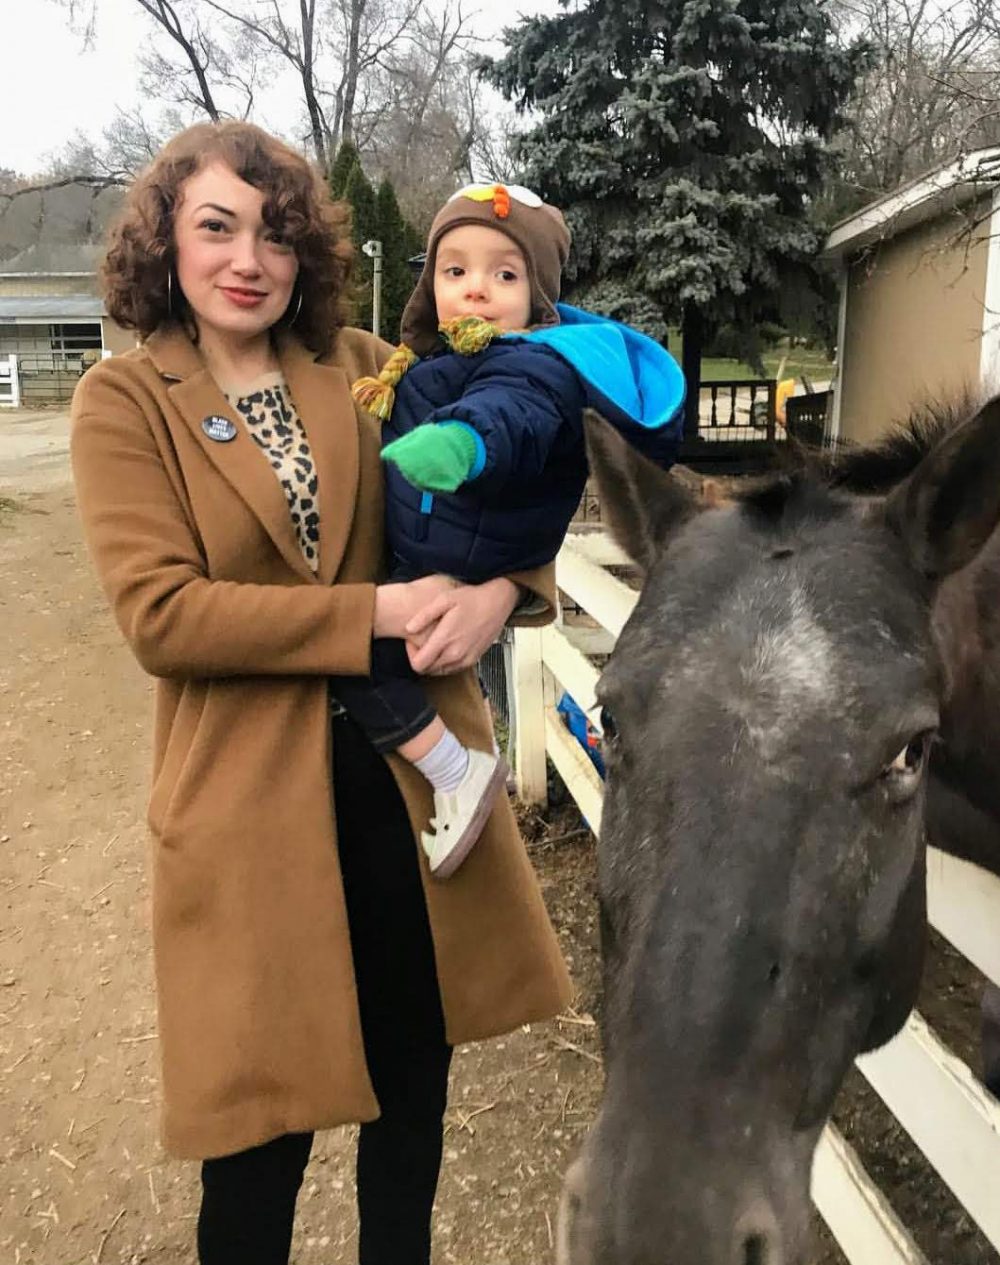 Mom holding child next to horse